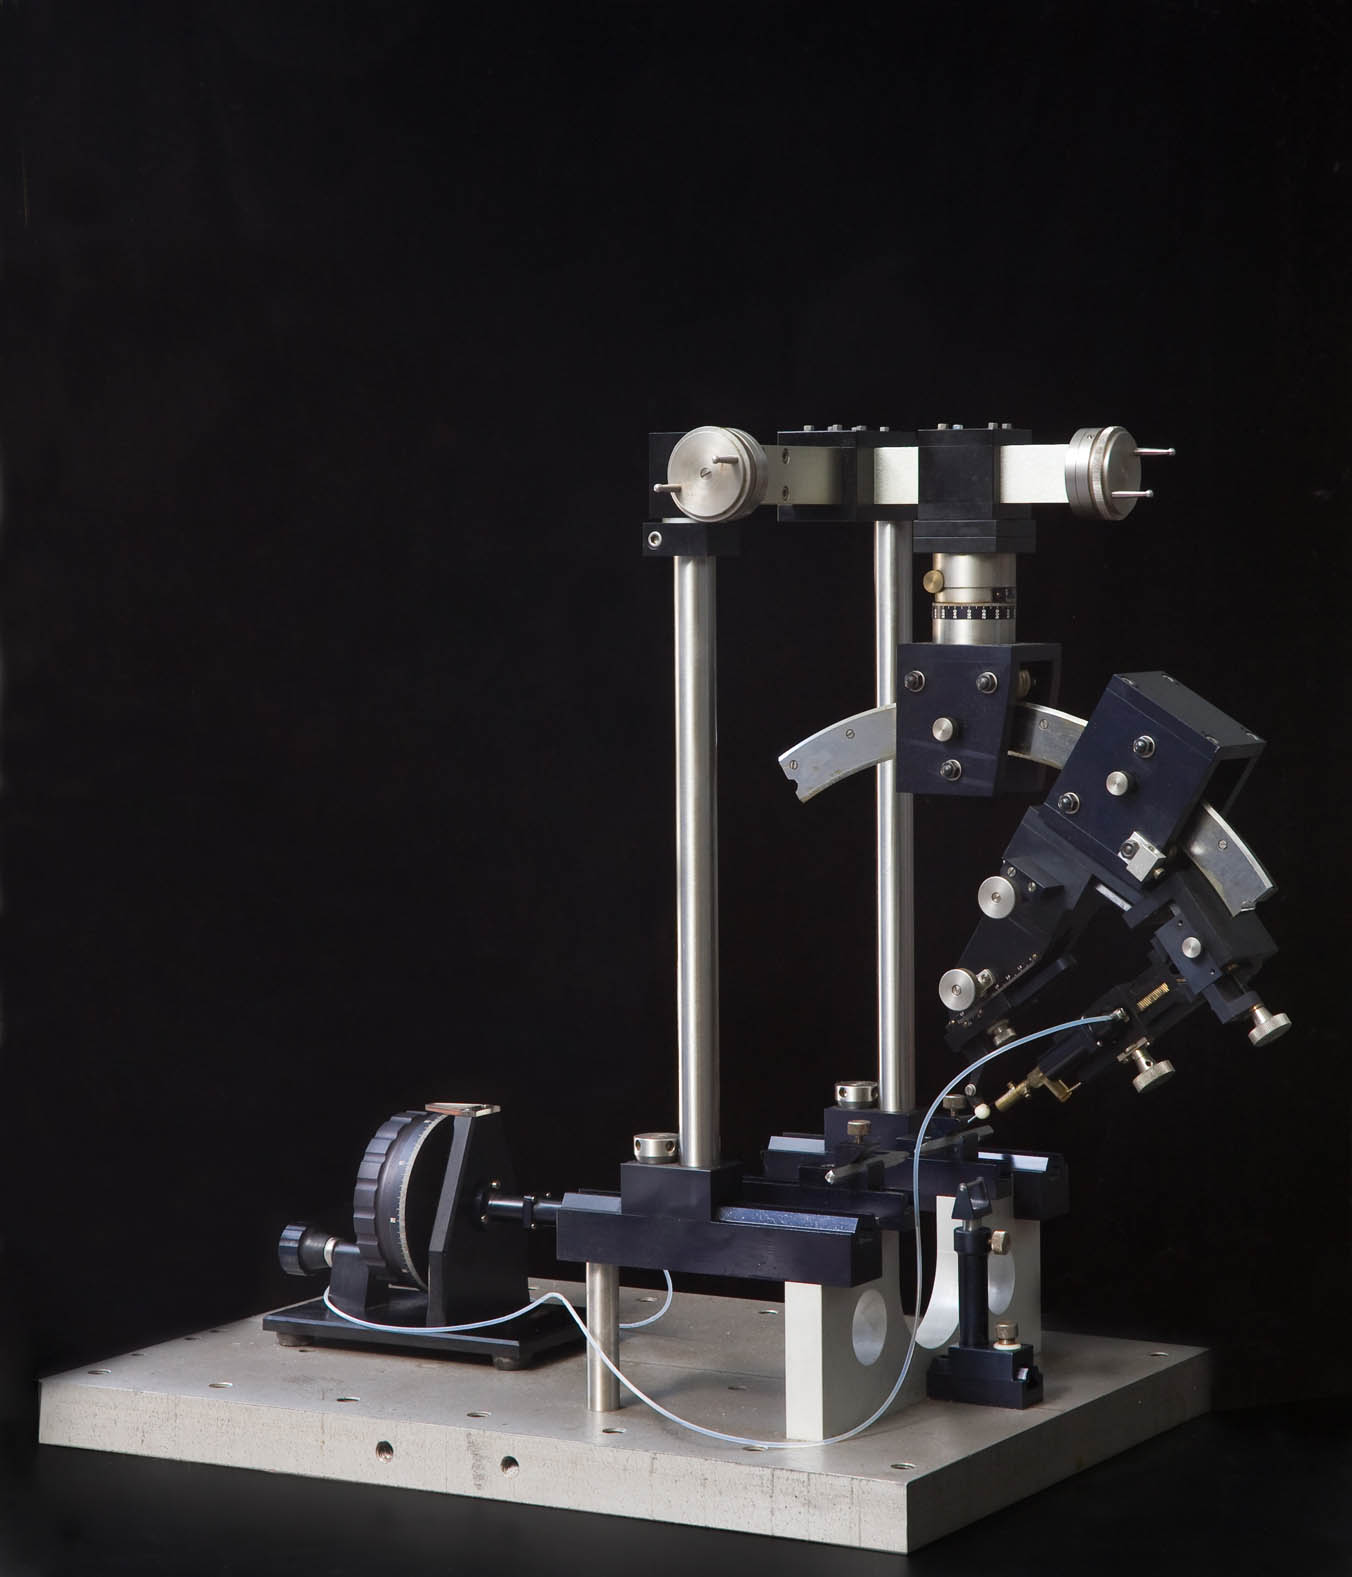 Linear-angular micromanipulator used to search for a point on a spherical surface